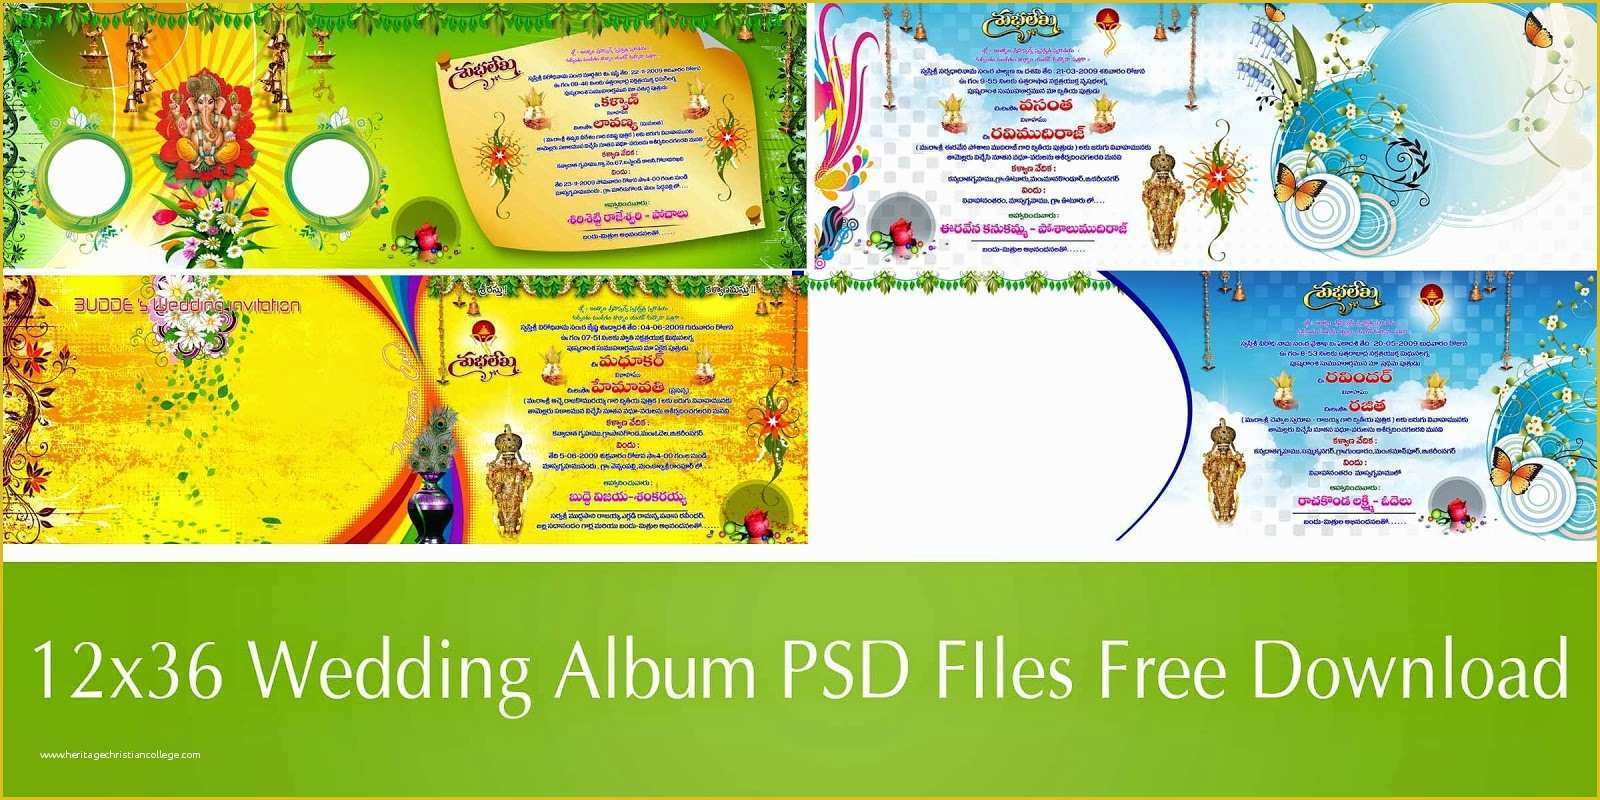 Wedding Website Templates Free Download Of 12x36 Album Psd Files Free Download Srihitha Ads